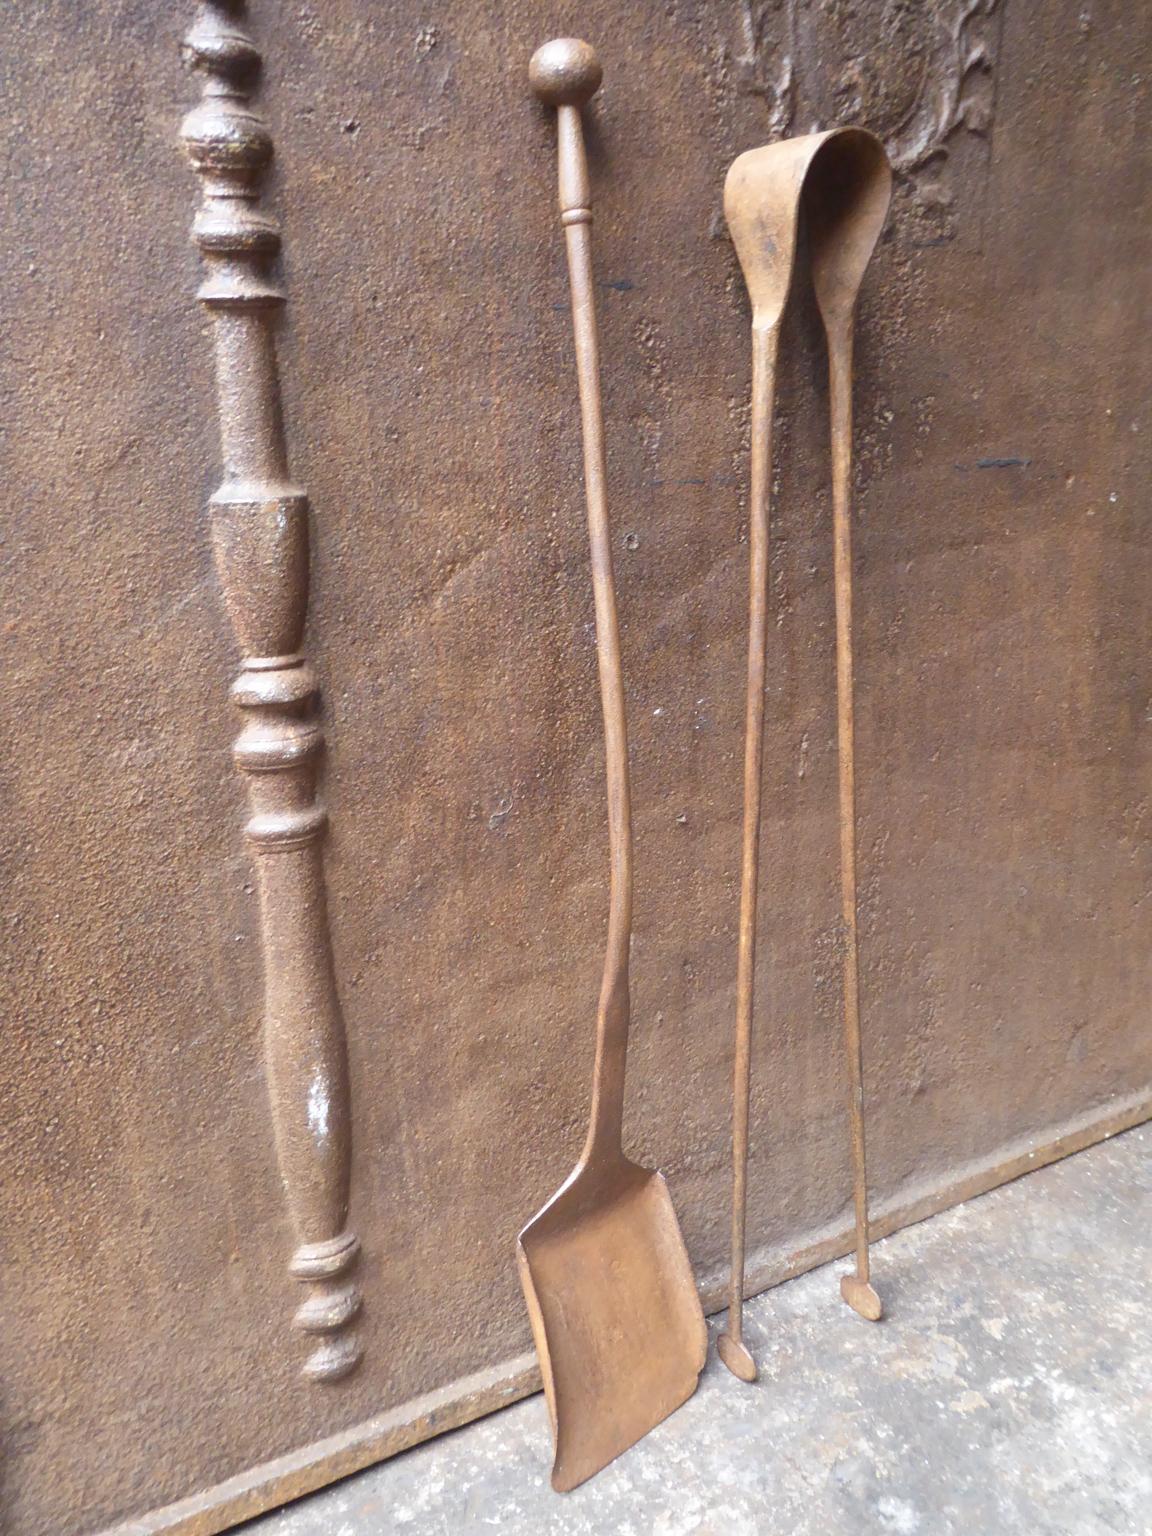 Large 18th century French Louis XV fireplace tool set consisting of fireplace tongs and a shovel. The fire irons are made of wrought iron. They are in a good condition and are fully functional.